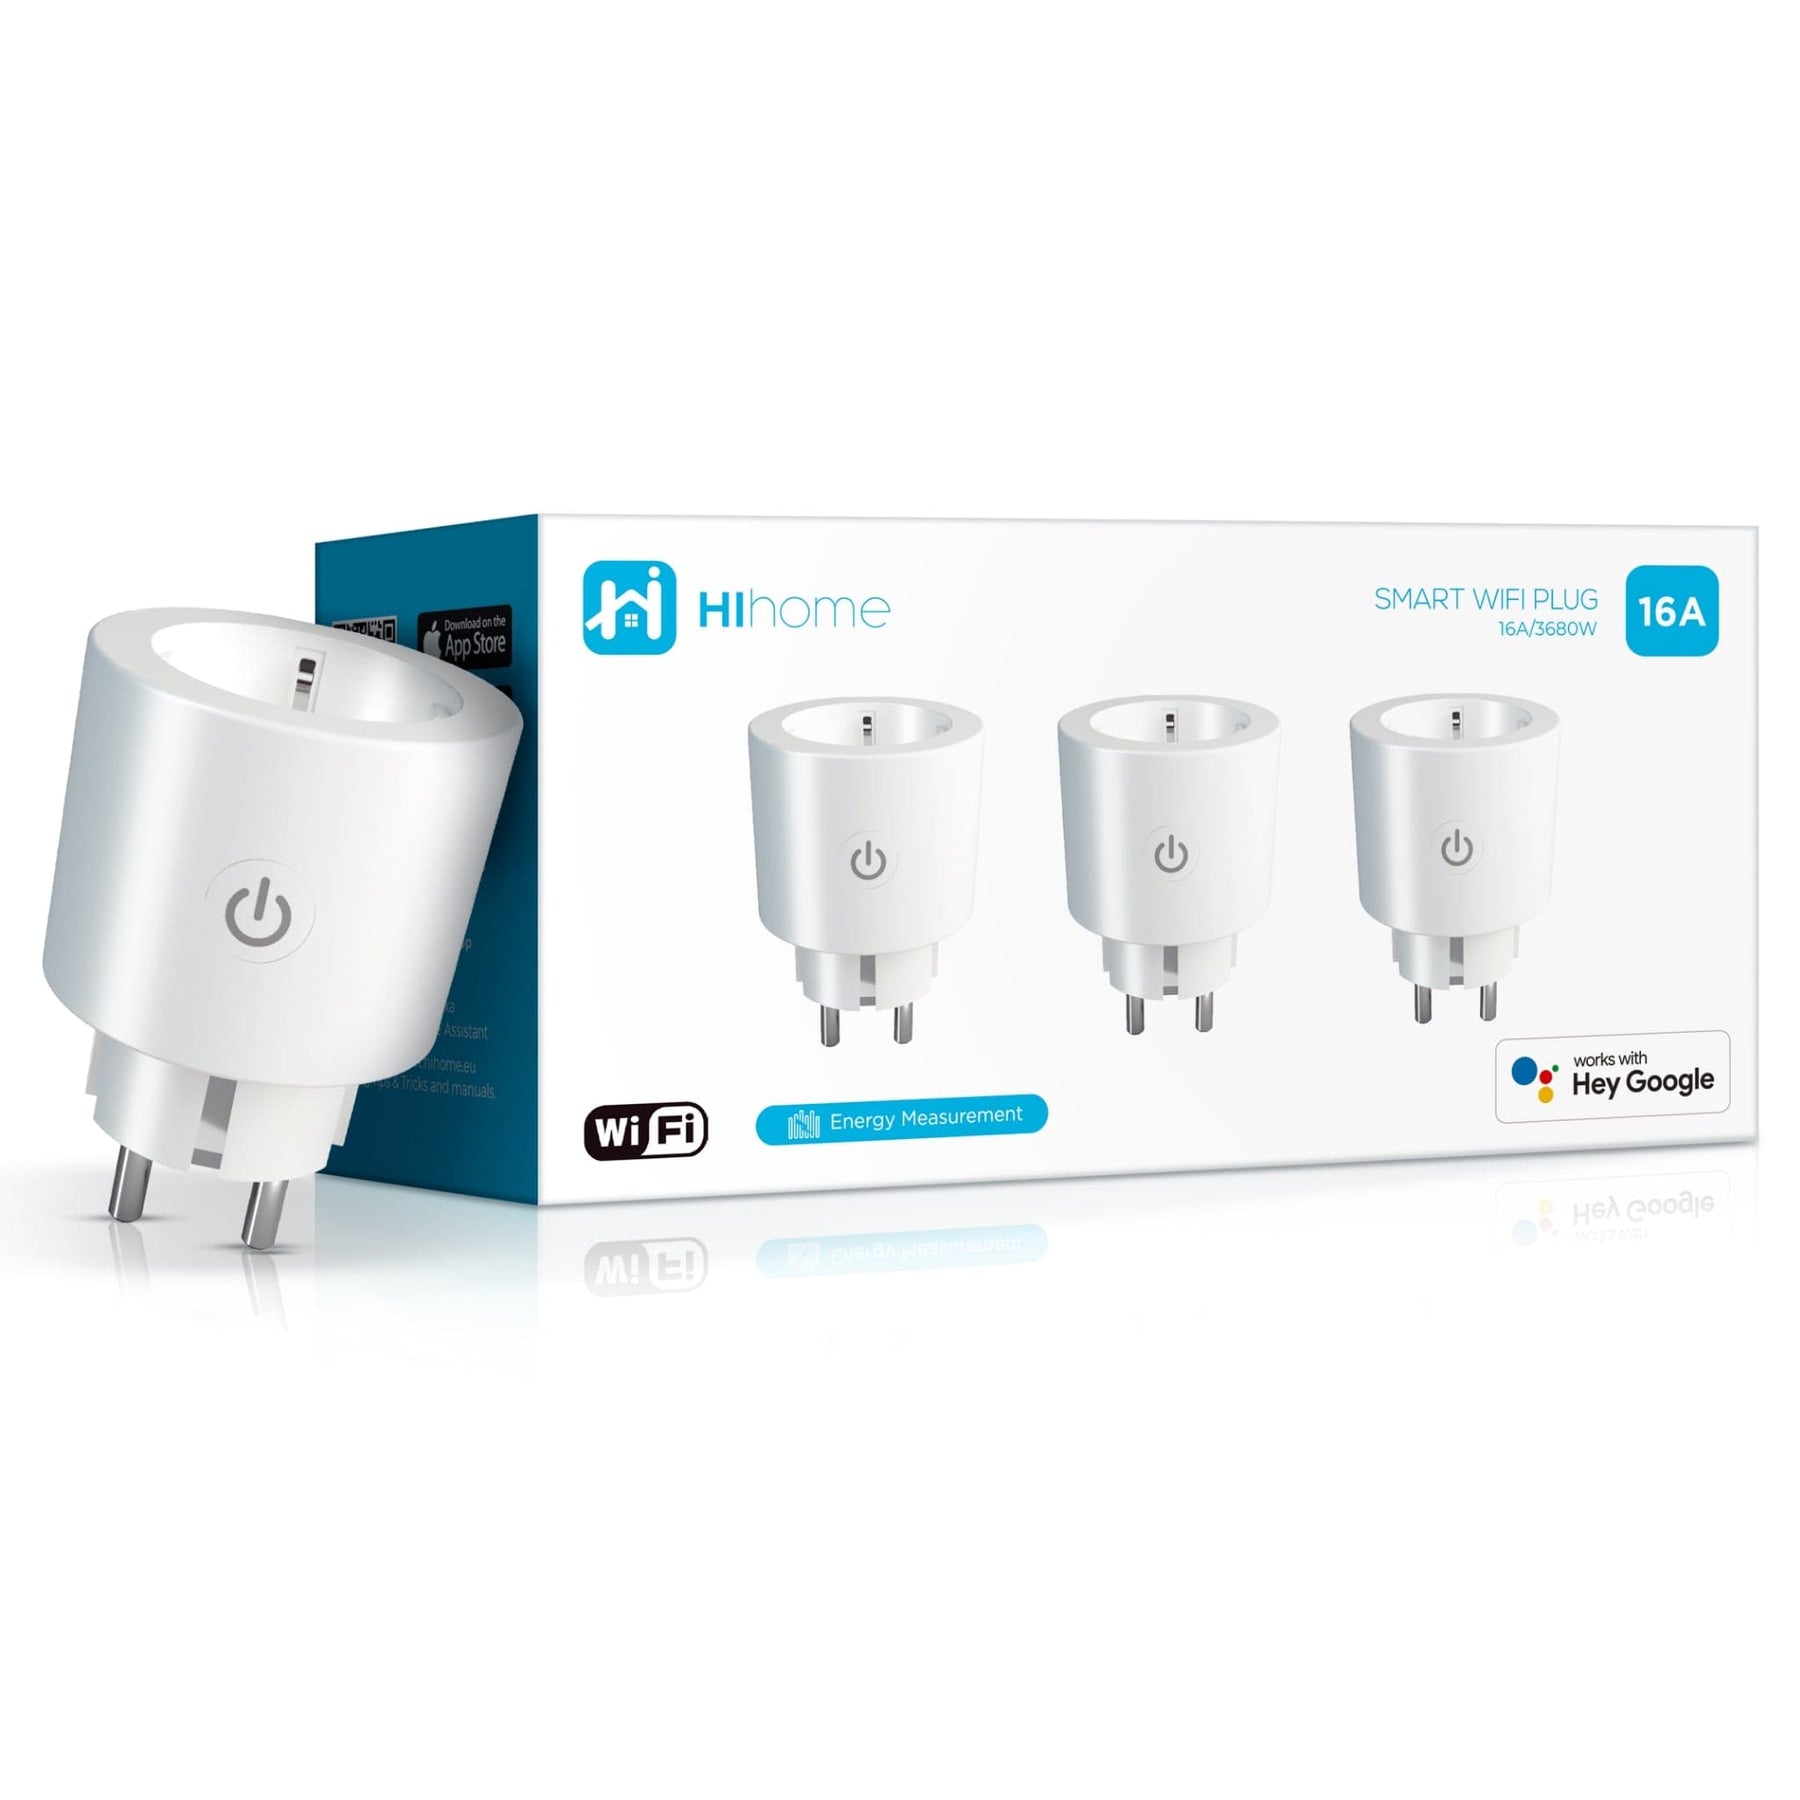 Hihome 3-pack Hihome Smart WiFi Plug Gen2 16A with energy meter WPP-16R-3-Pack